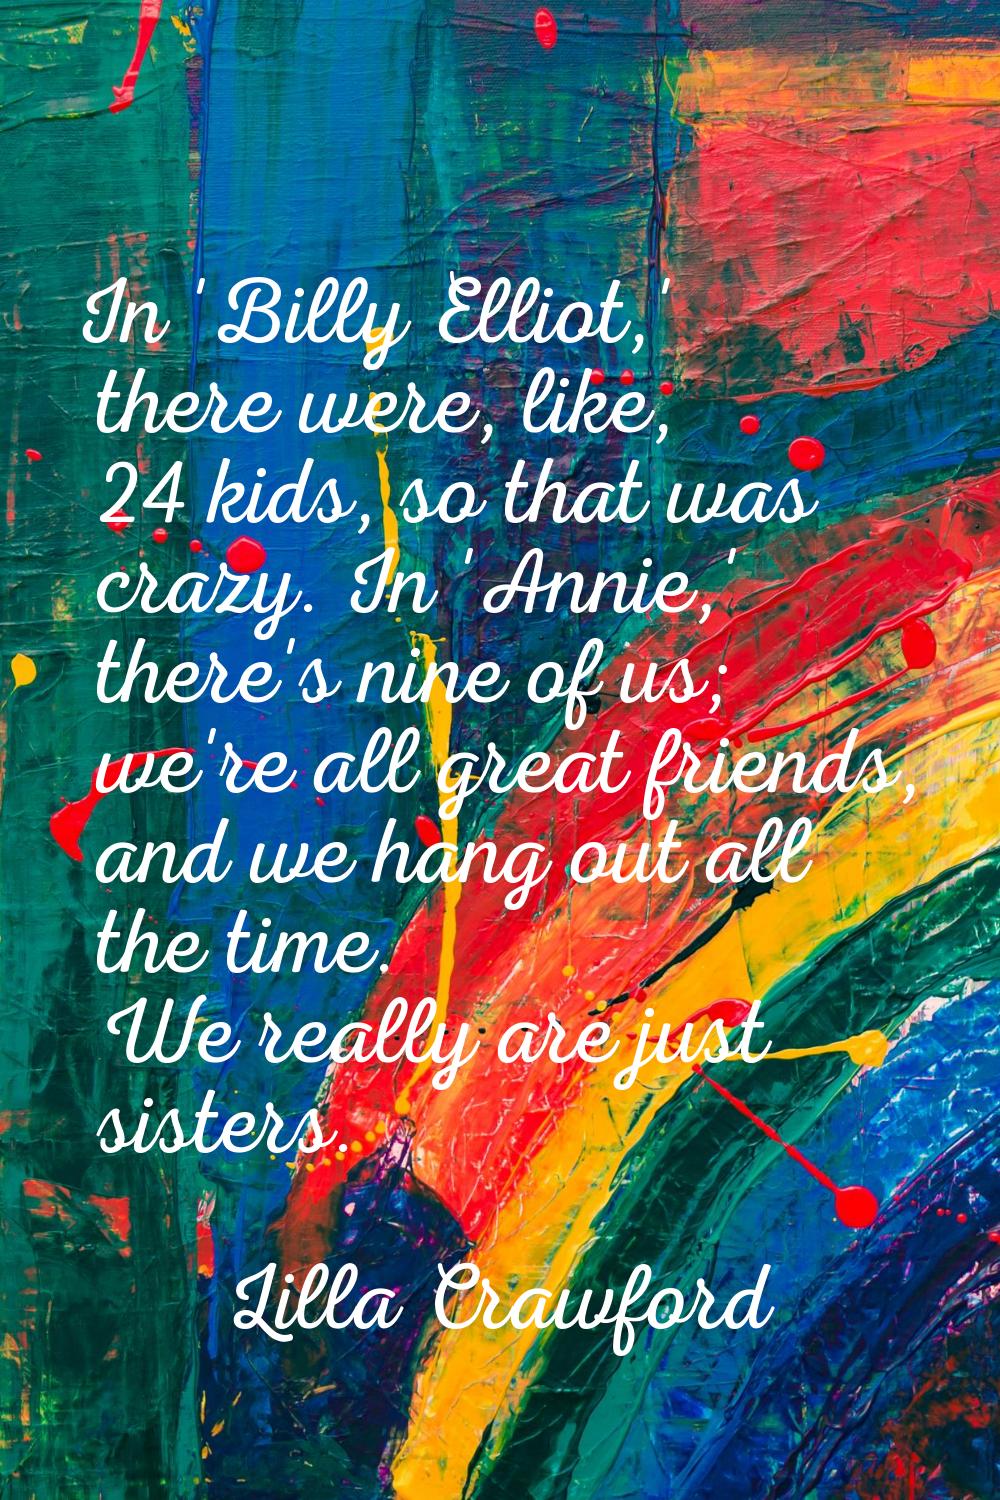 In 'Billy Elliot,' there were, like, 24 kids, so that was crazy. In 'Annie,' there's nine of us; we